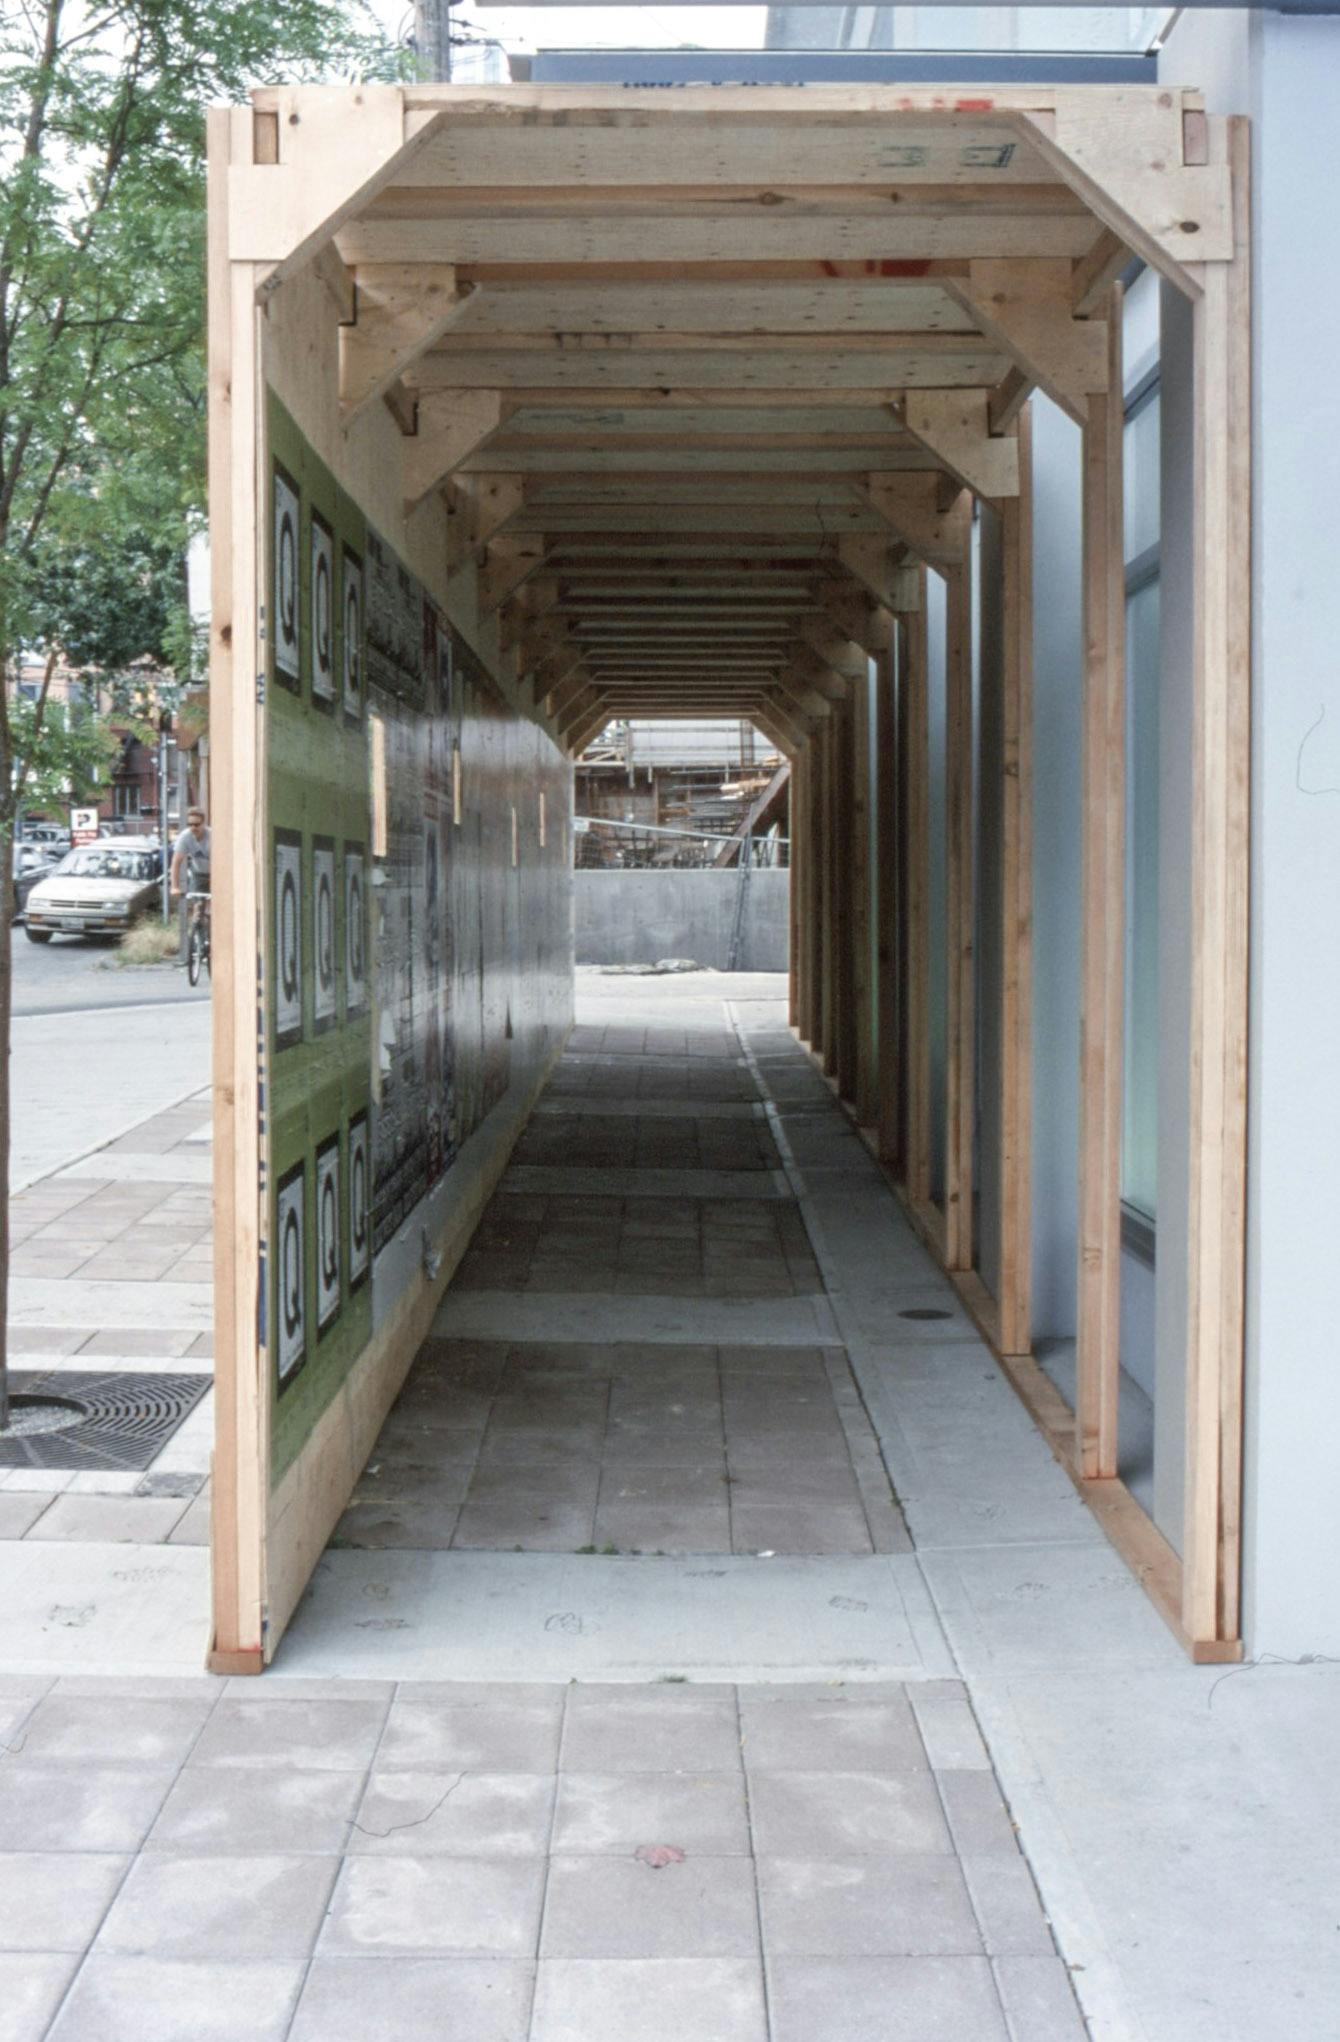 An unpainted wooden tunnel is built in front of CAG’s window spaces. It resembles construction hoardings. The title of this work is “Unlimited Growth Increases The Divide.”